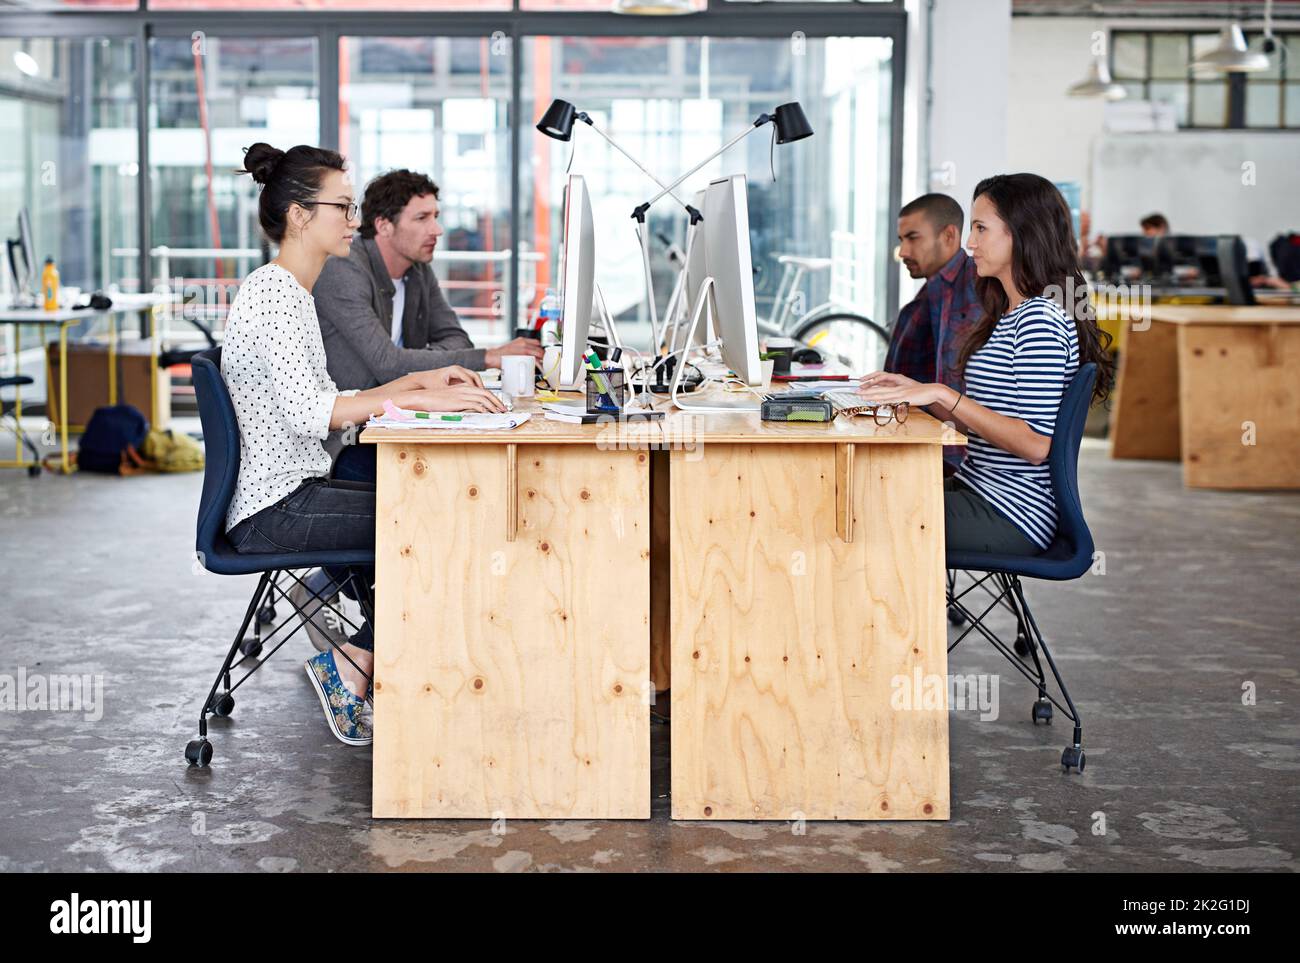 Make creativity a job. Shot of a group of young office workers sitting at their work stations. Stock Photo